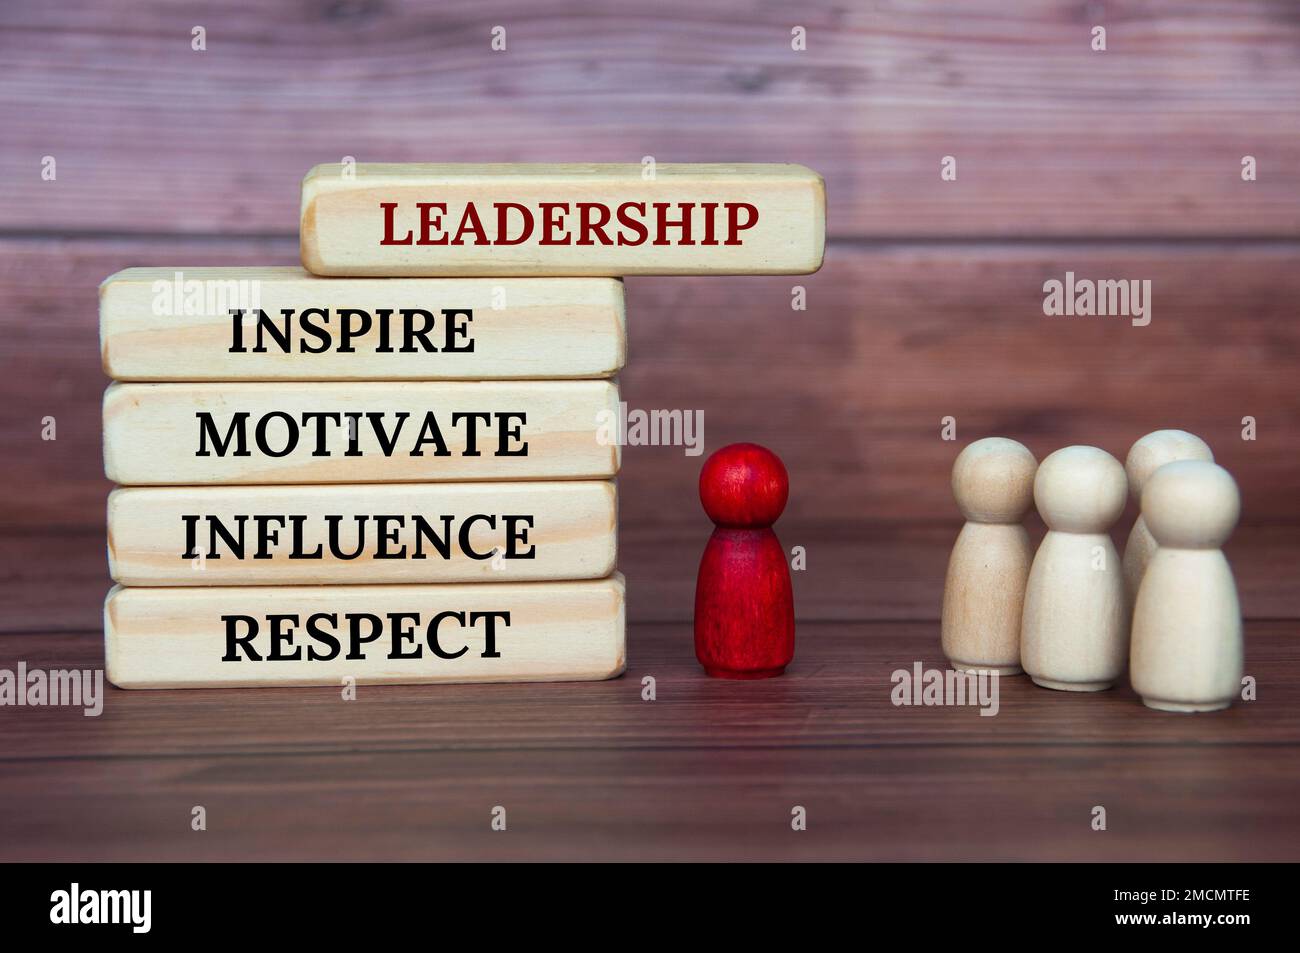 Leadership concept - Leadership, inspire, motivate, influence and respect text on wooden blocks with red and white wooden figure background. Stock Photo